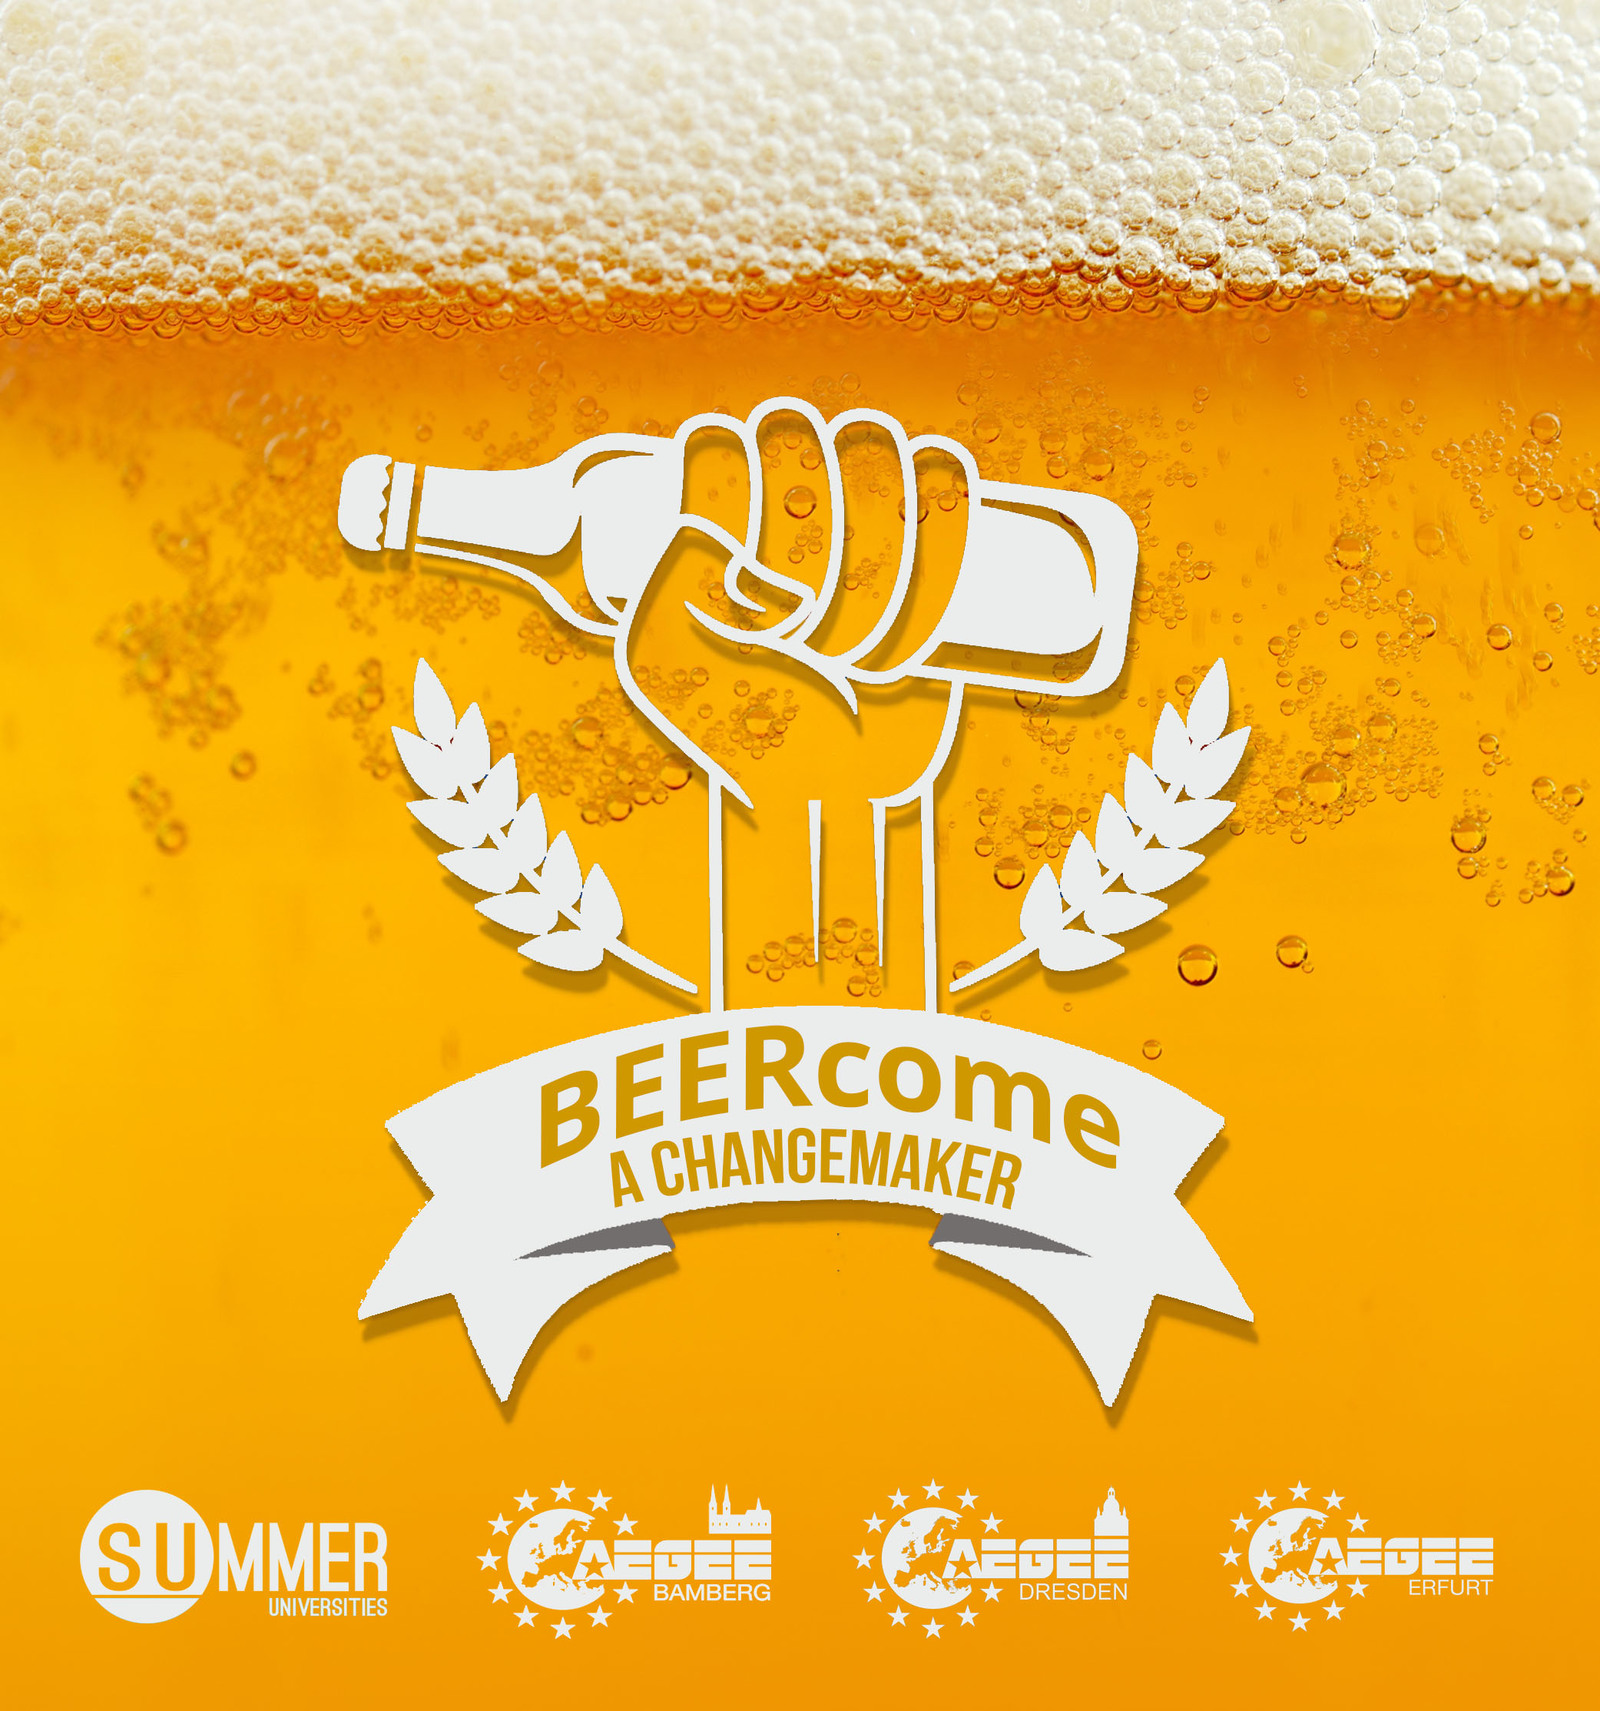 SUits off: BEERcome a changemaker Profile Picture